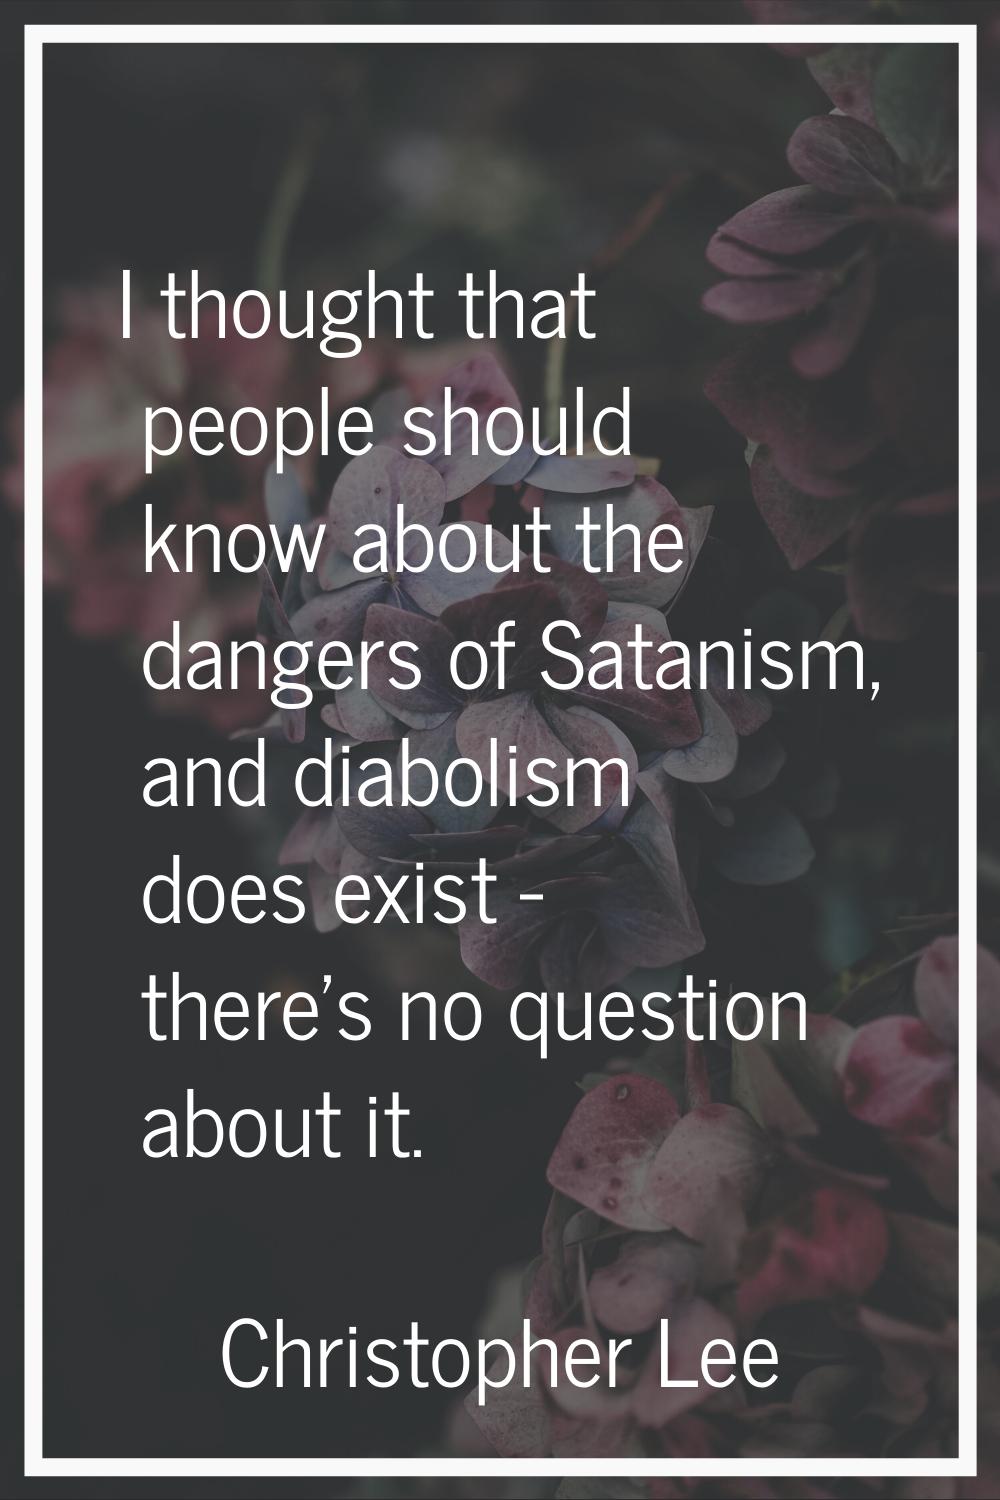 I thought that people should know about the dangers of Satanism, and diabolism does exist - there's